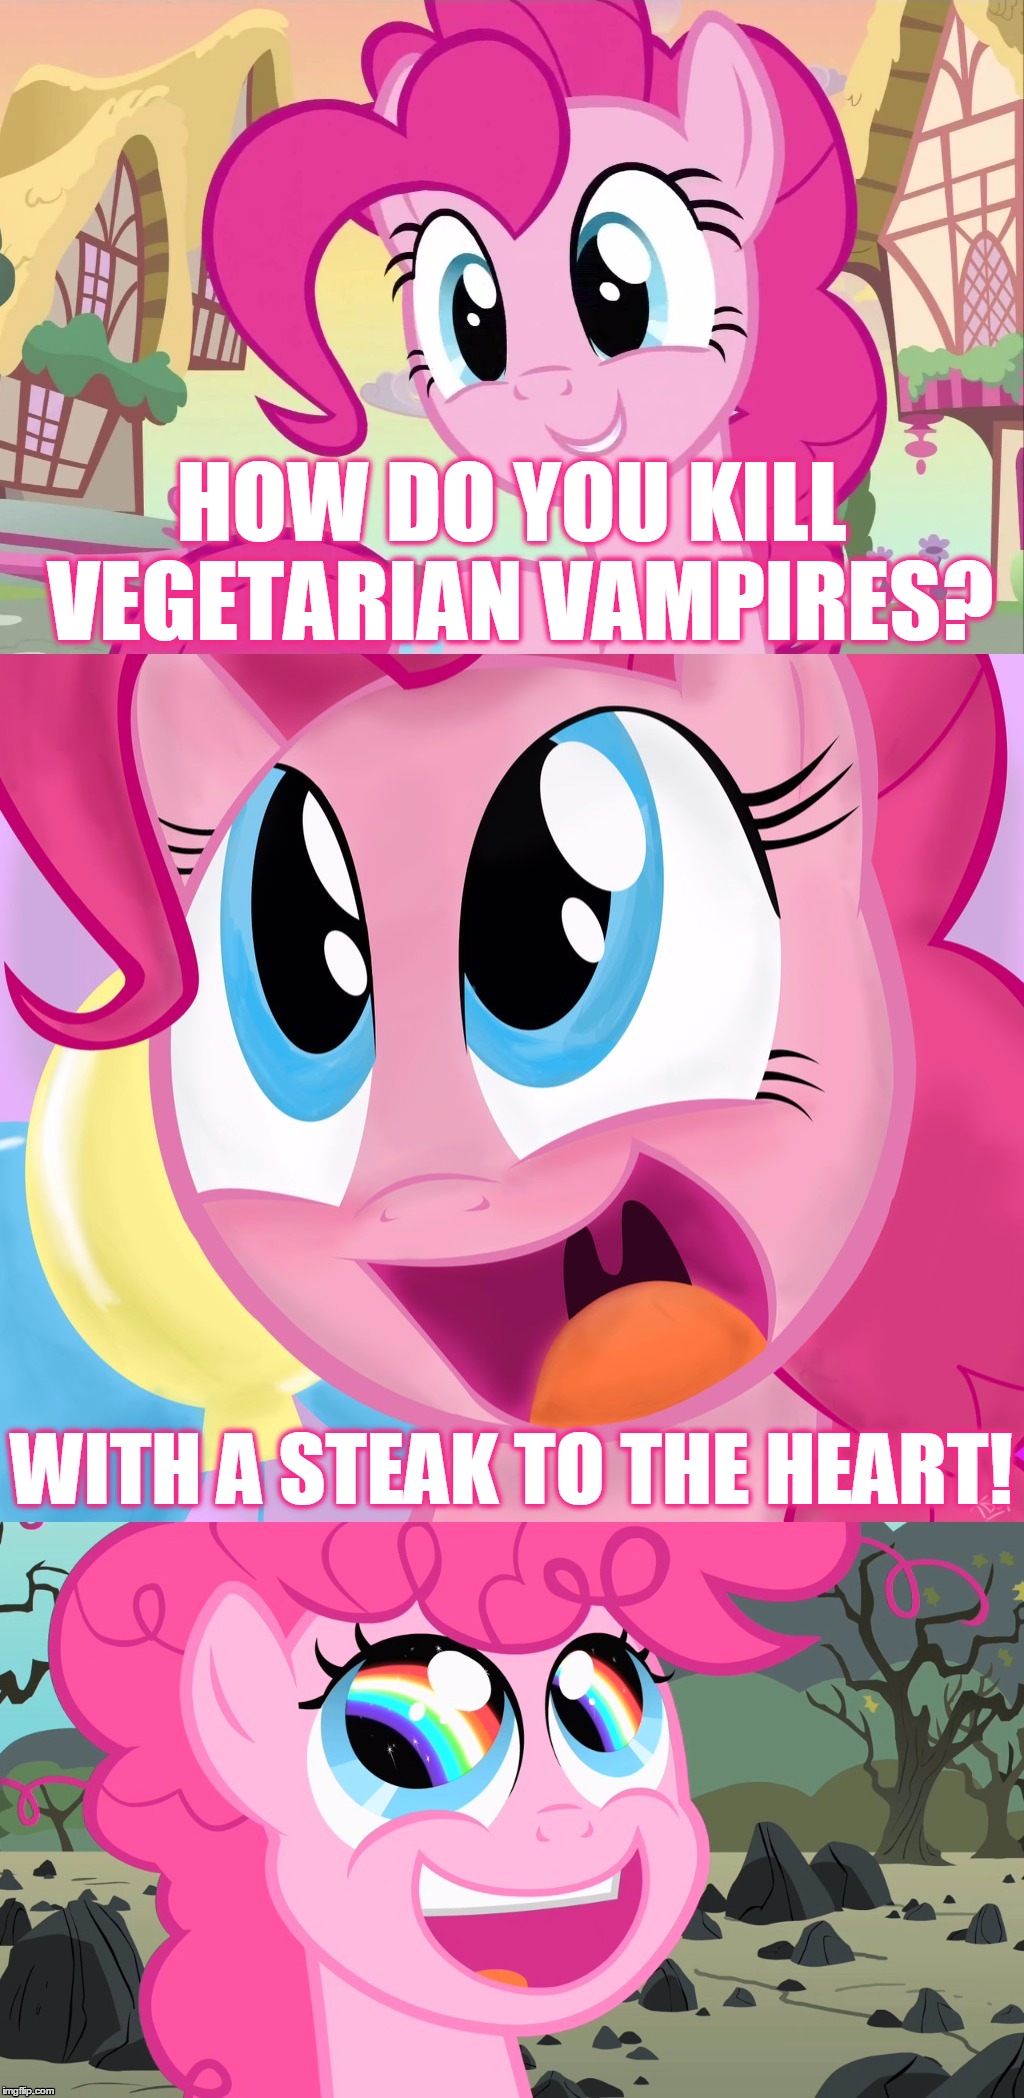 Bad Pun Pinkie Pie | HOW DO YOU KILL VEGETARIAN VAMPIRES? WITH A STEAK TO THE HEART! | image tagged in bad pun pinkie pie,memes,bad pun,pinkie pie,mlp,my little pony | made w/ Imgflip meme maker